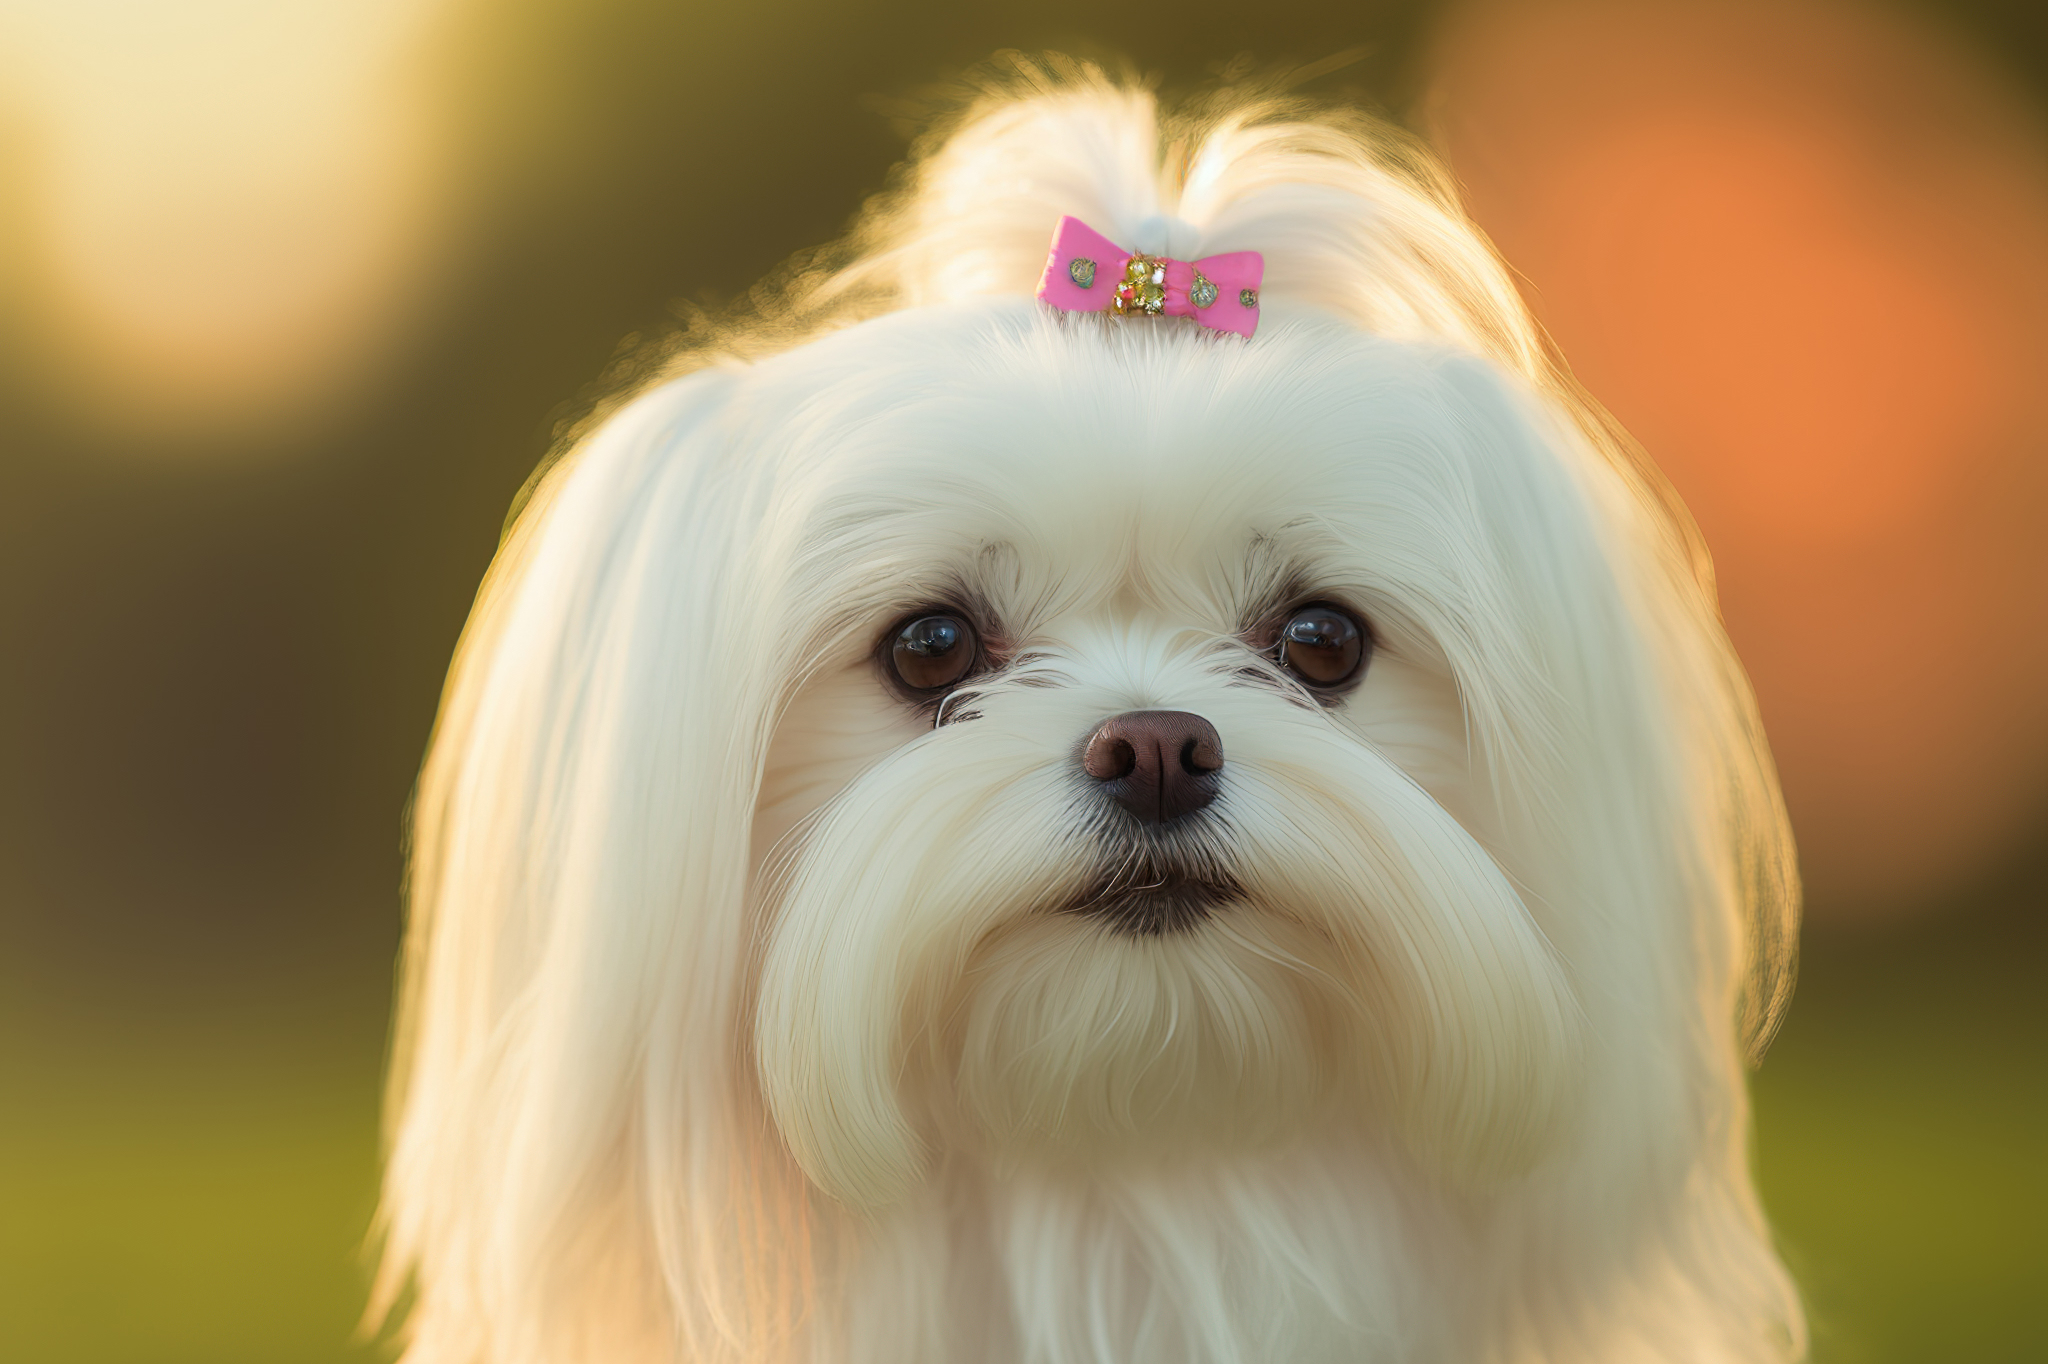 Maintaining your Maltese's coat and skin with Groomit